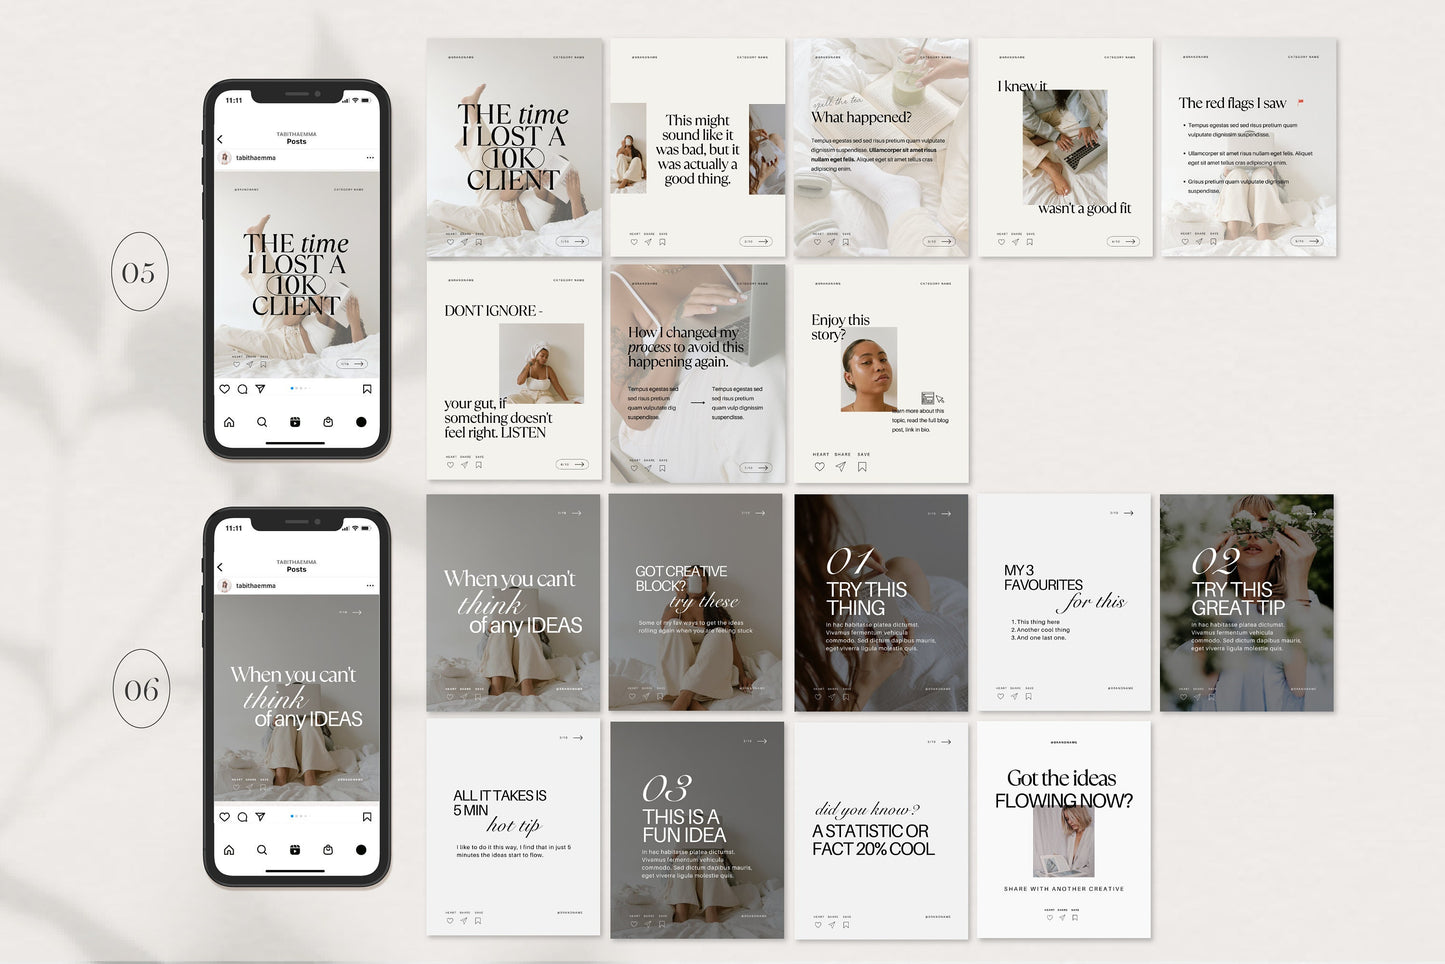 Instagram Carousel Educational and Story Telling Small Business Templates for Canva (Digital Download)